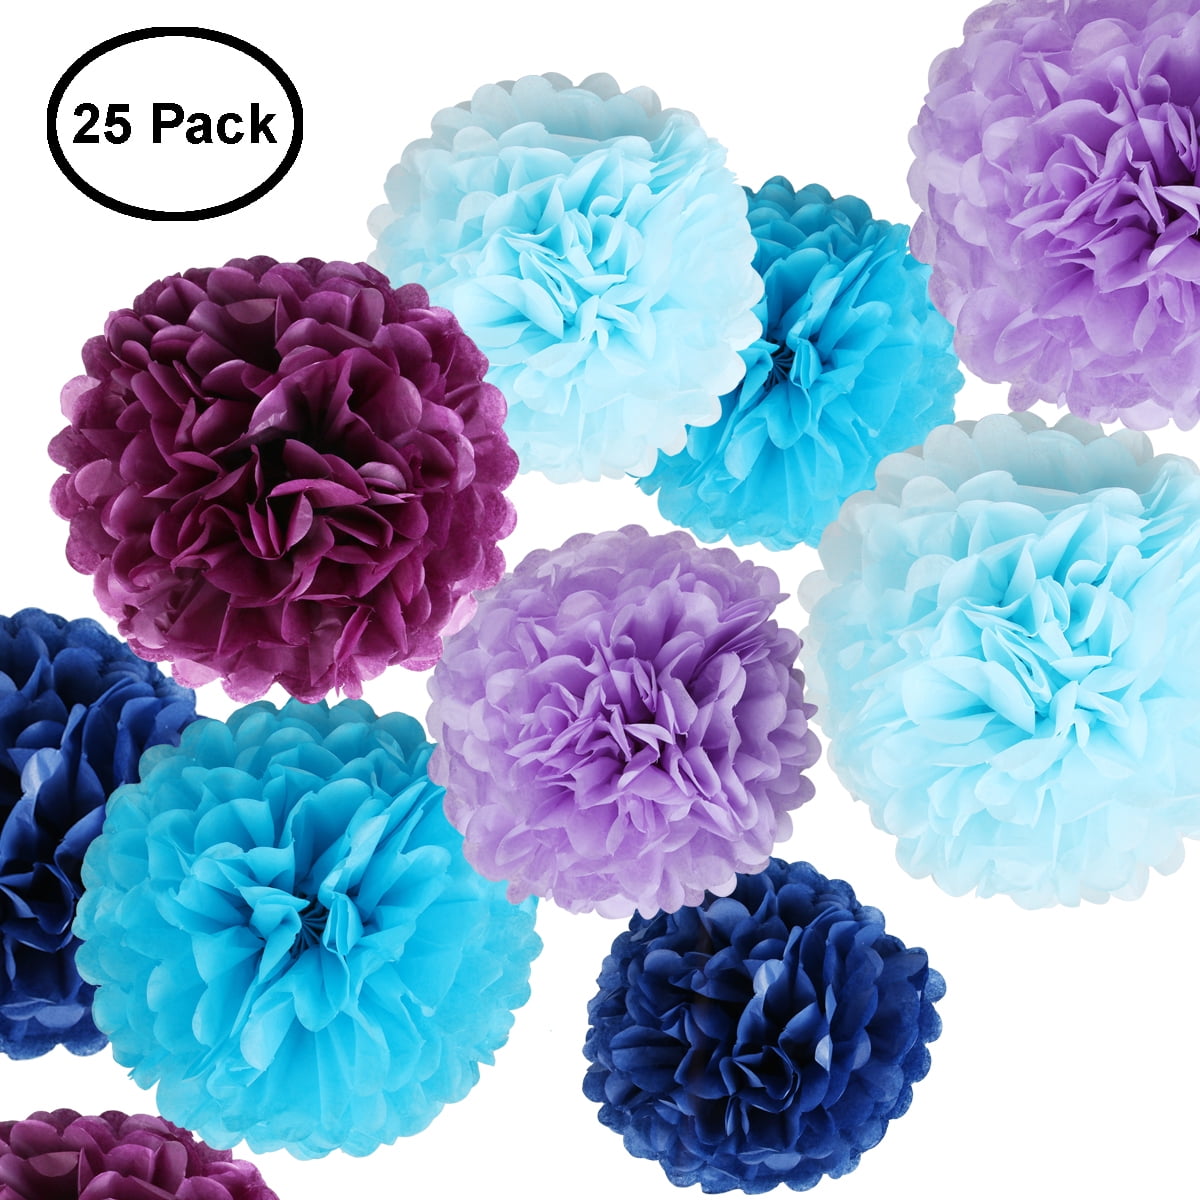 Wedding / Party / Christmas Venue Decorations - yellow 16inches Tiissue Paper Pom Poms Pack of 5